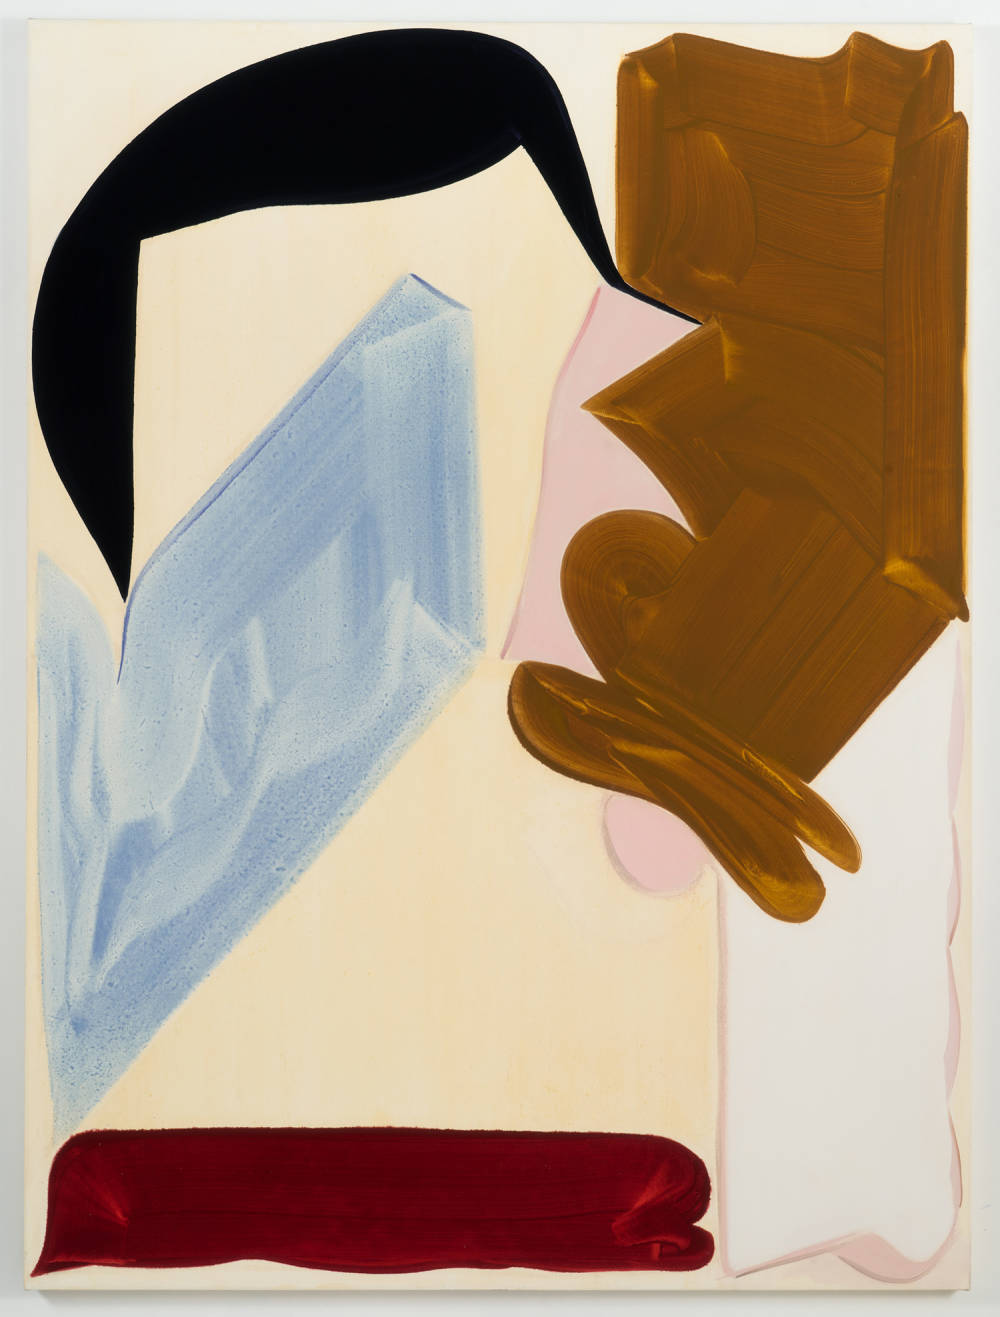 A large abstract painting. The ground of the painting is a warm white. The painting contains multiple dominant abstract forms. The forms are painted gesturally. The dominant colors are shades of brown, black, blue, and magenta. 